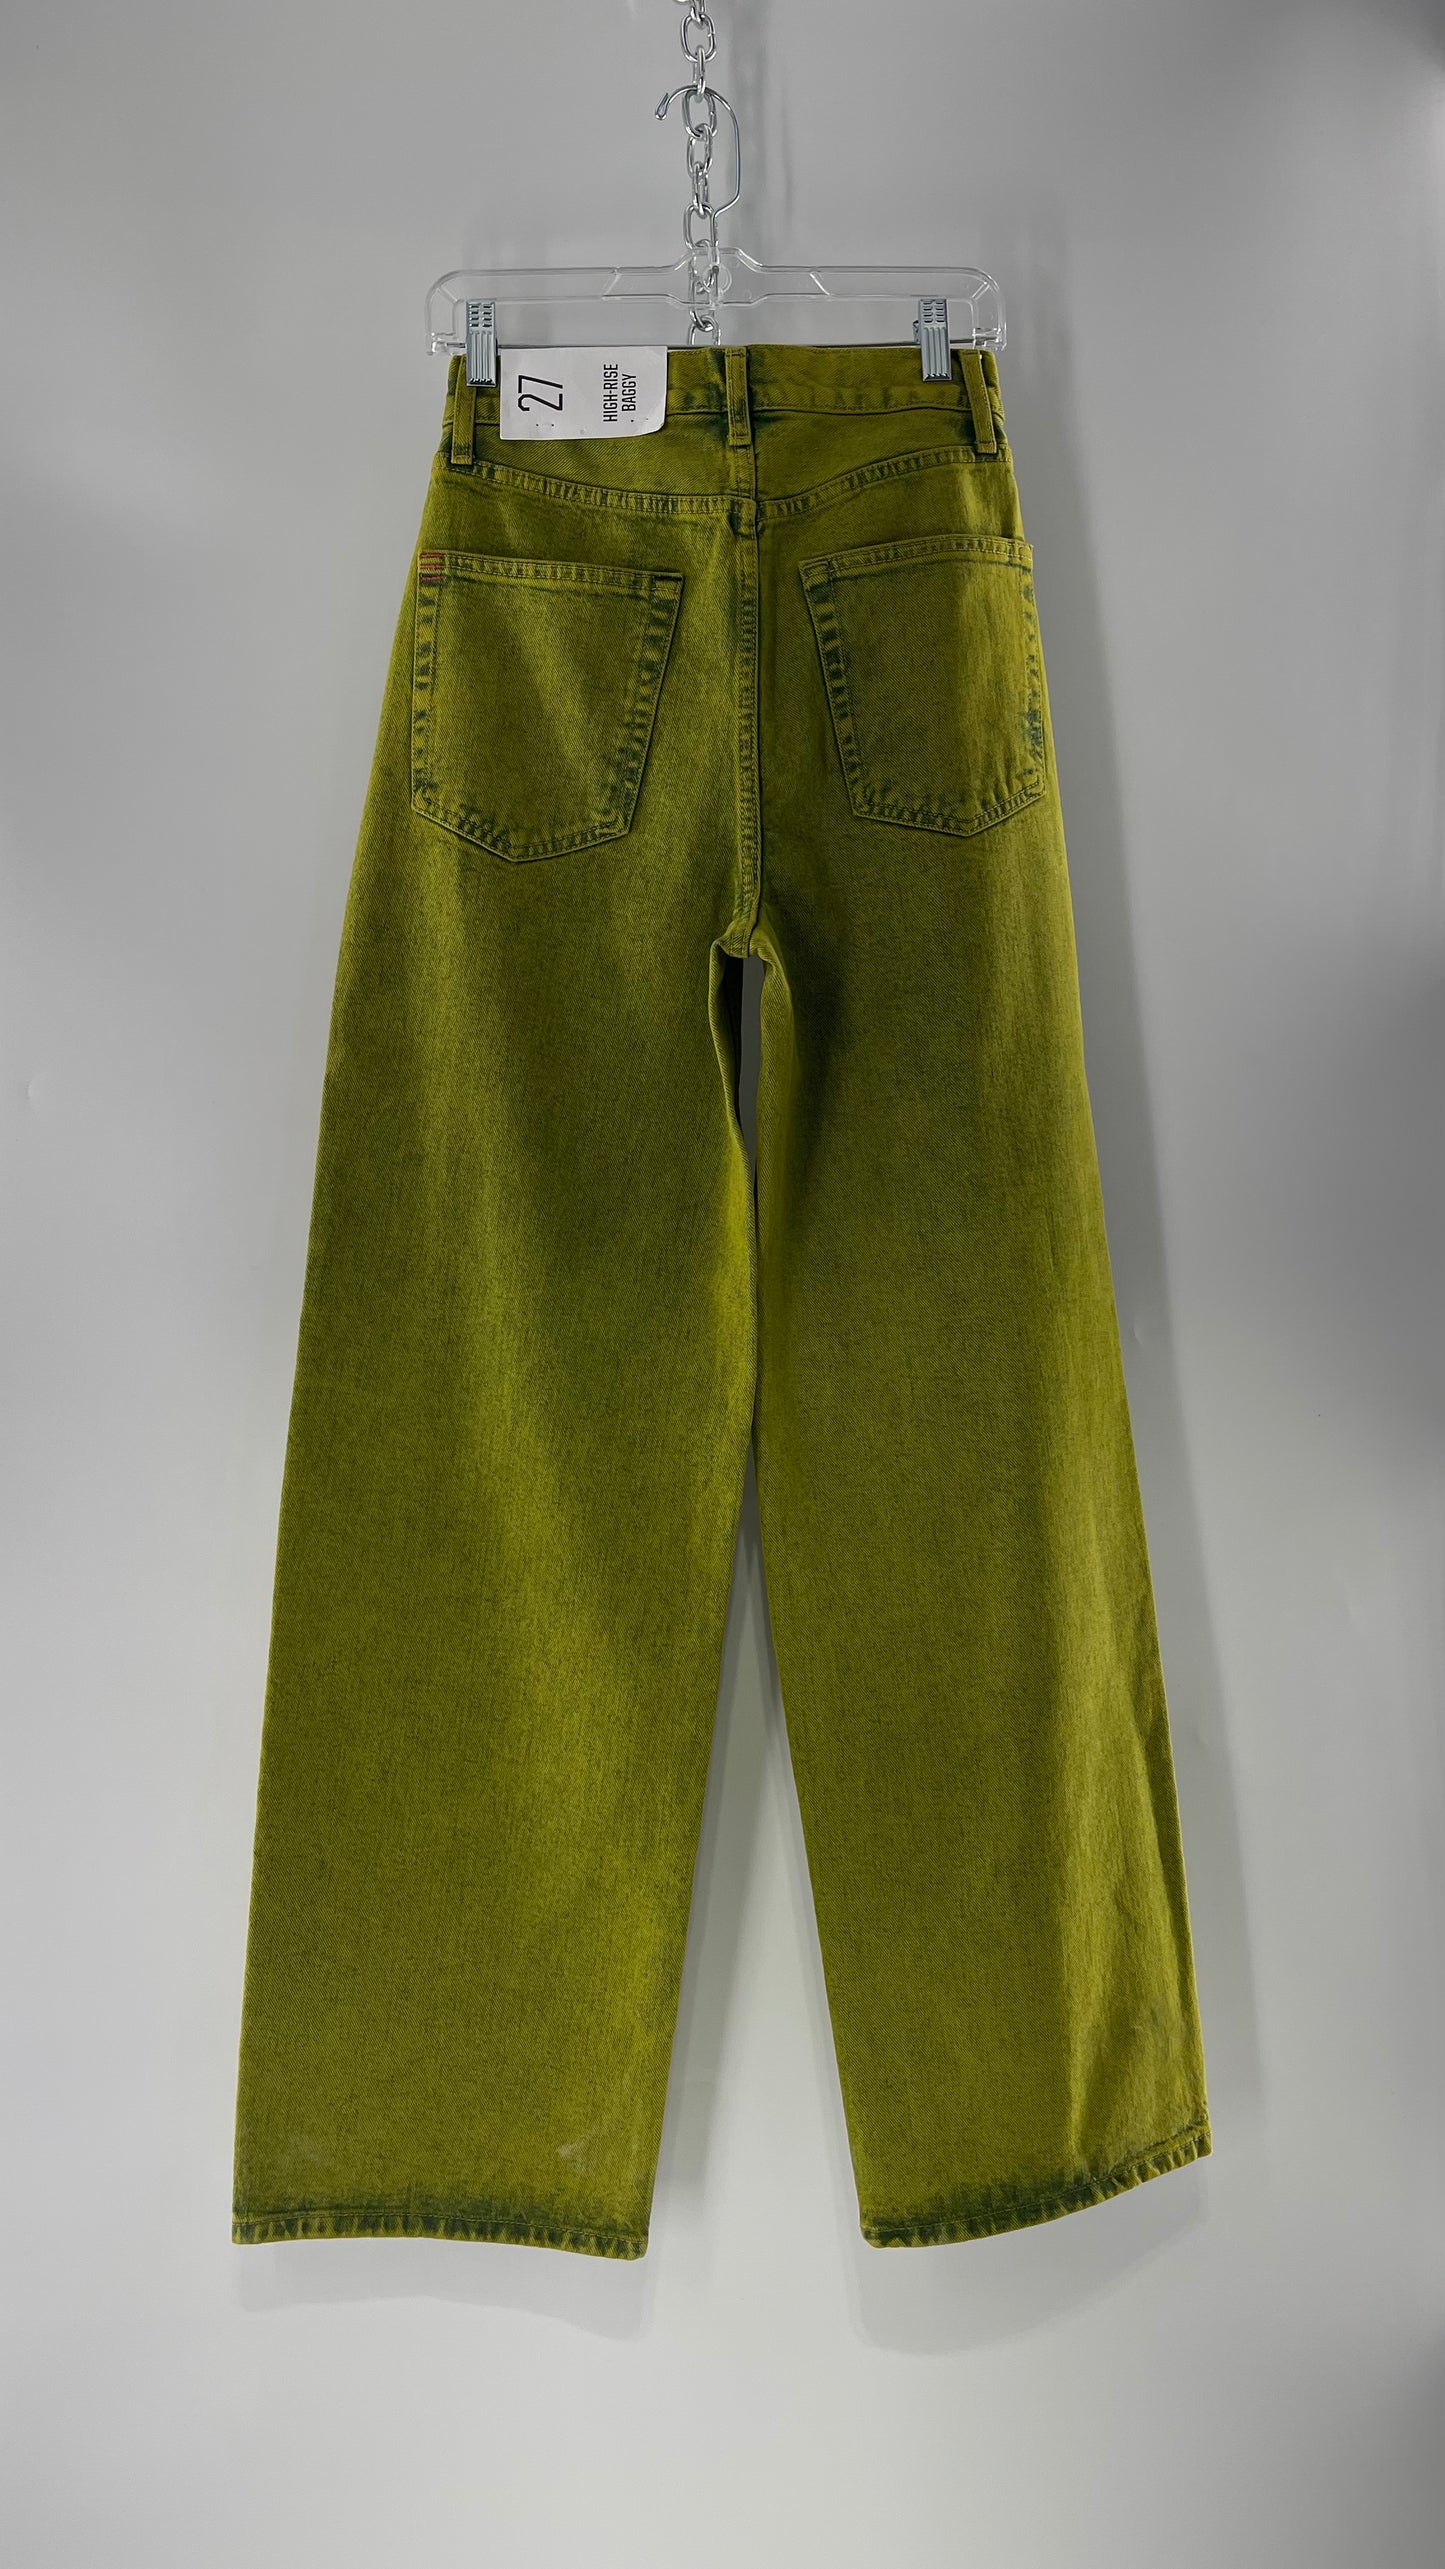 Slime Green Acid Wash High Rise Baggy BDG Urban Outfitters Jeans  (27)